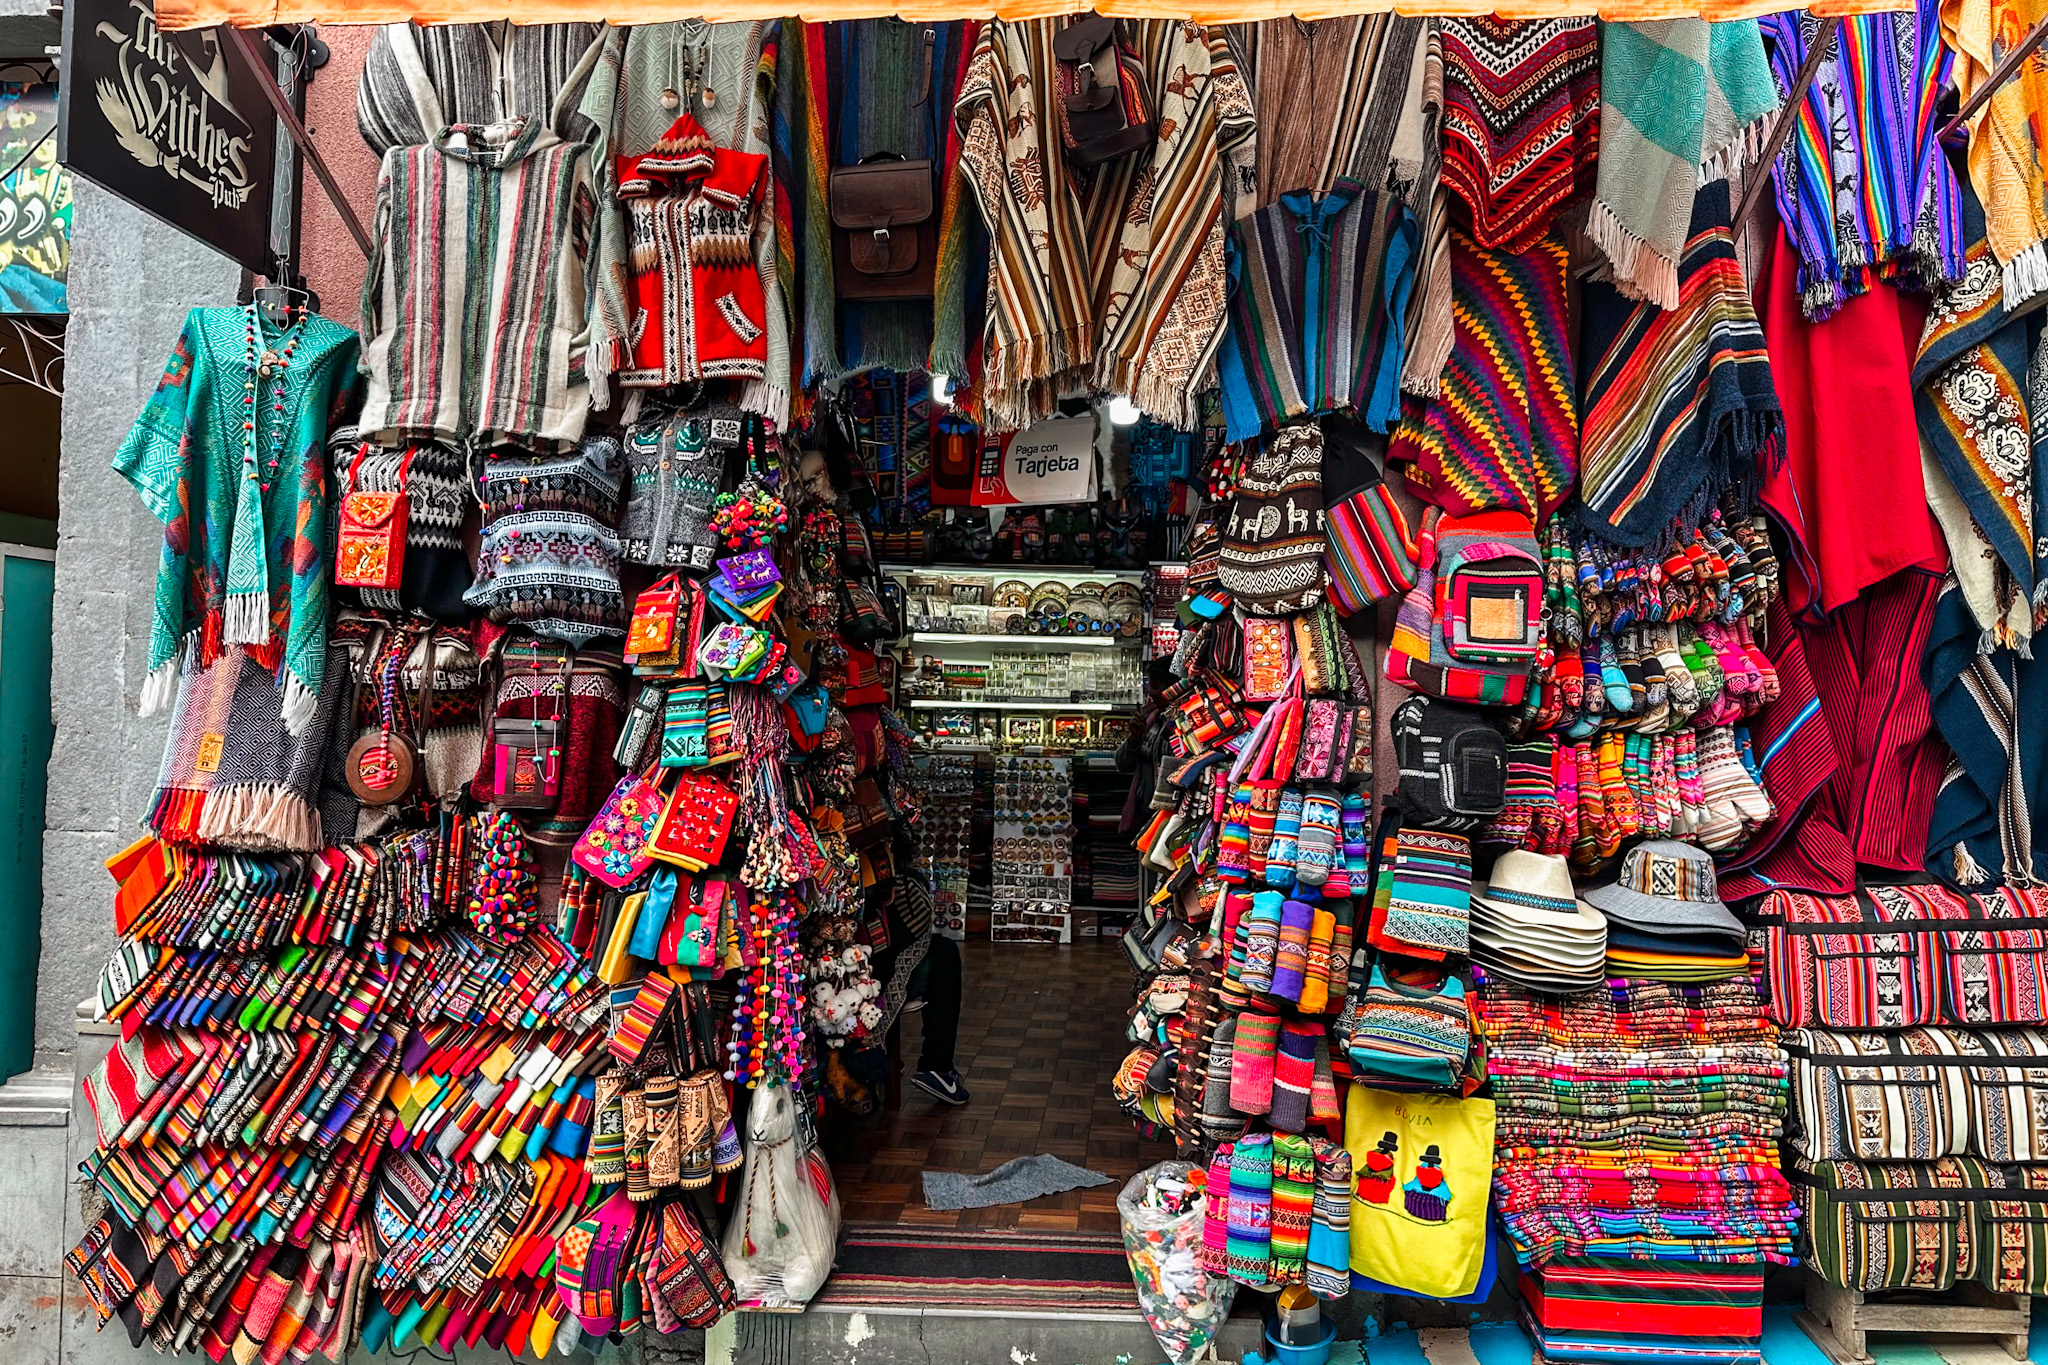 Things to do in La Paz, Bolivia: Bus some souvenirs